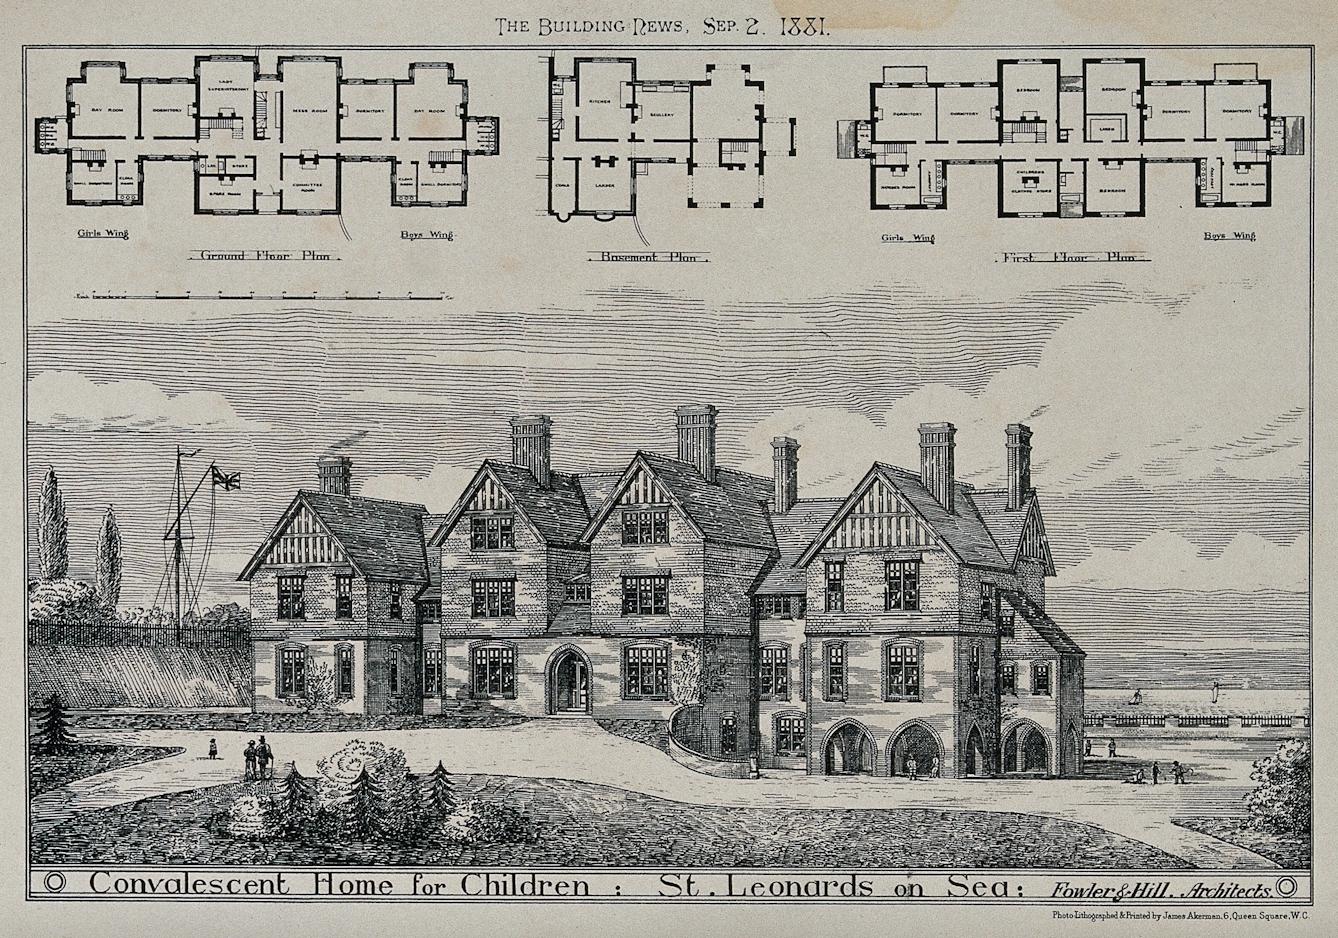 Perspective view of the Convalescent Home for Children, St Leonards. Floor plans are also included. 